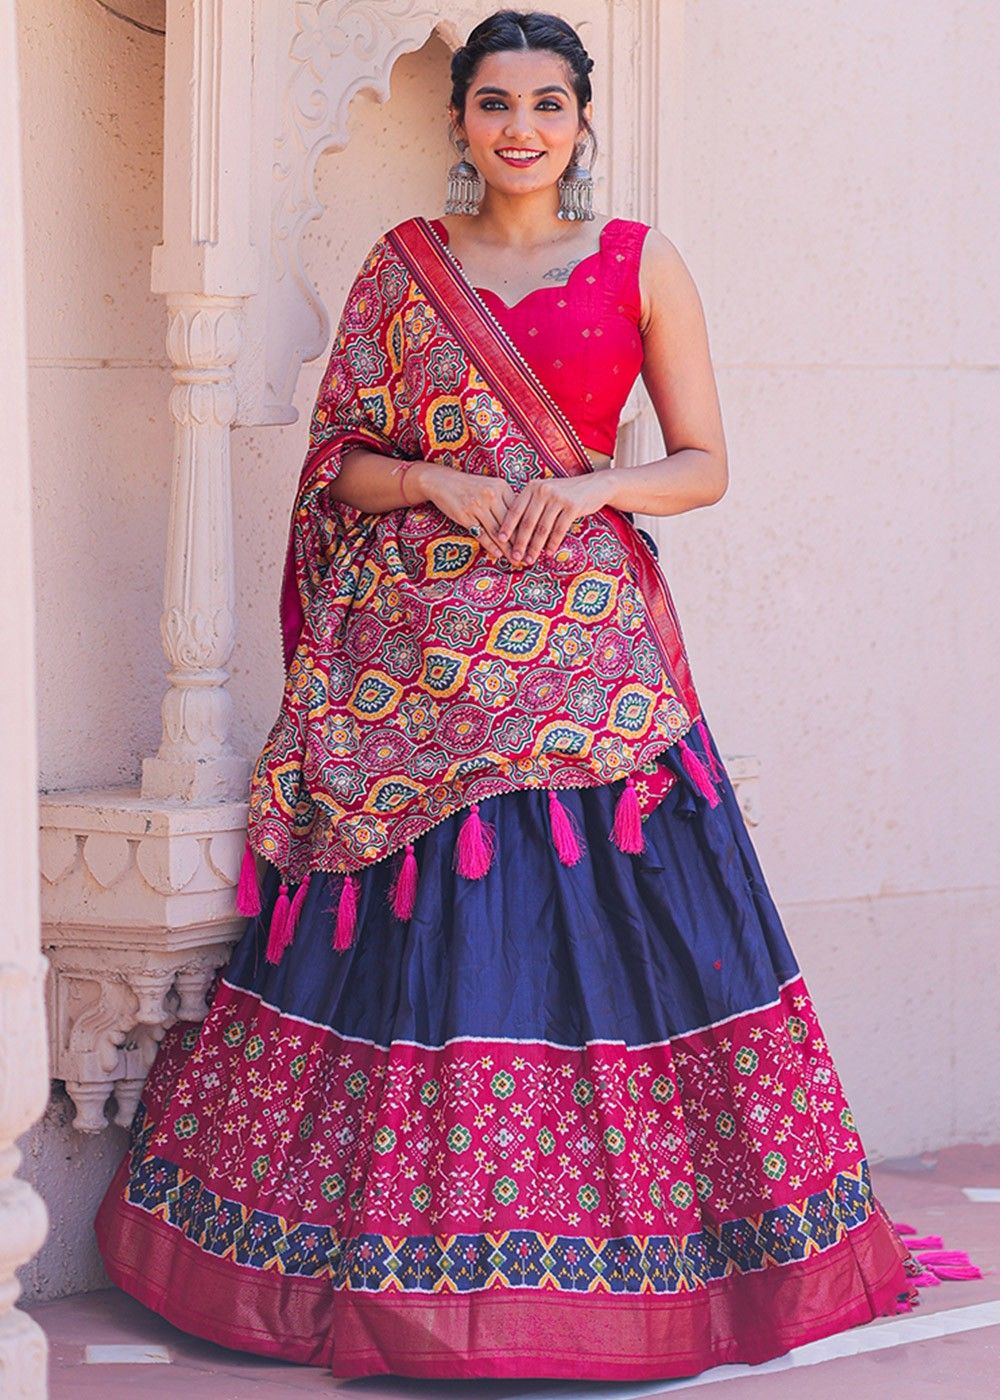 Buy Mehreen Nakkashi's Women's Handloom Raw Silk Embroidery Lehenga with  Cancan and Blouse and Pink Net Pallu/dupatta - Blue, 44 at Amazon.in